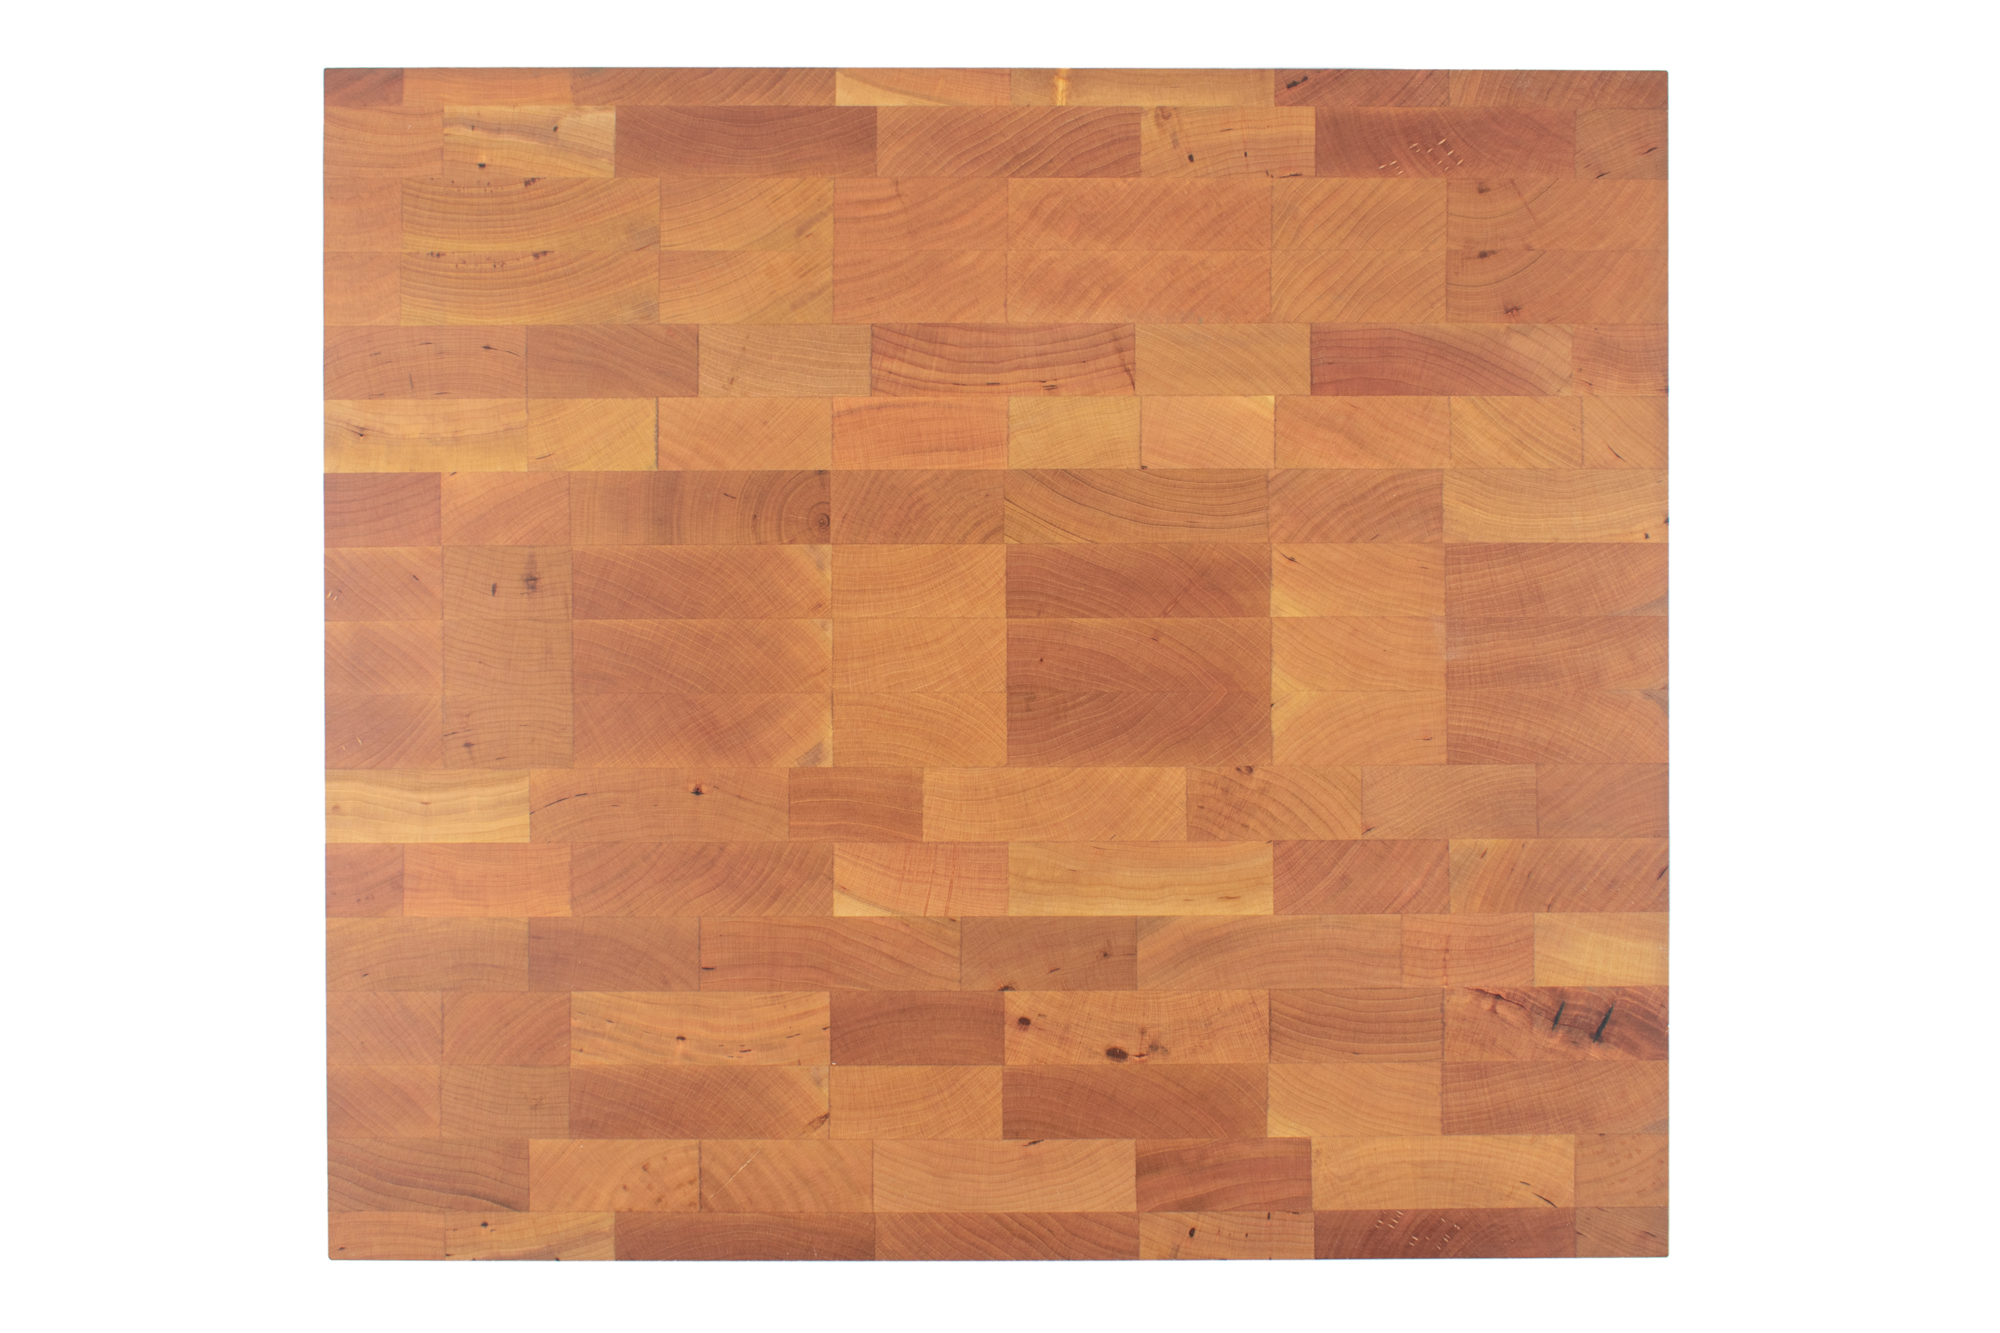 Large Cherry End grain butcher block with side handle indents 